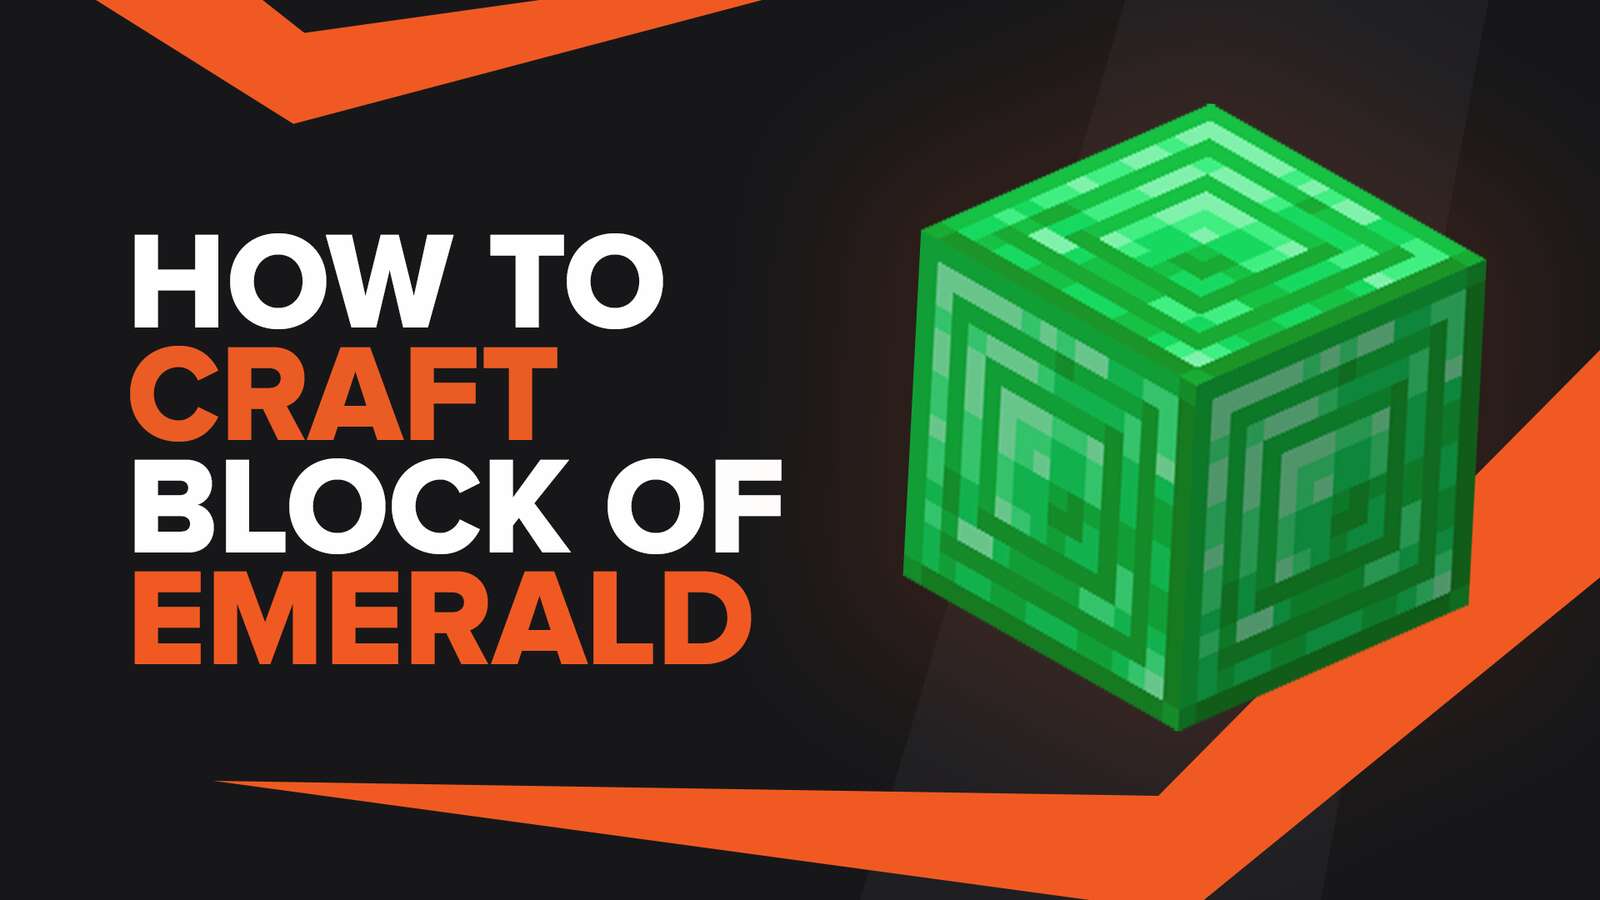 How To Make Block Of Emerald In Minecraft